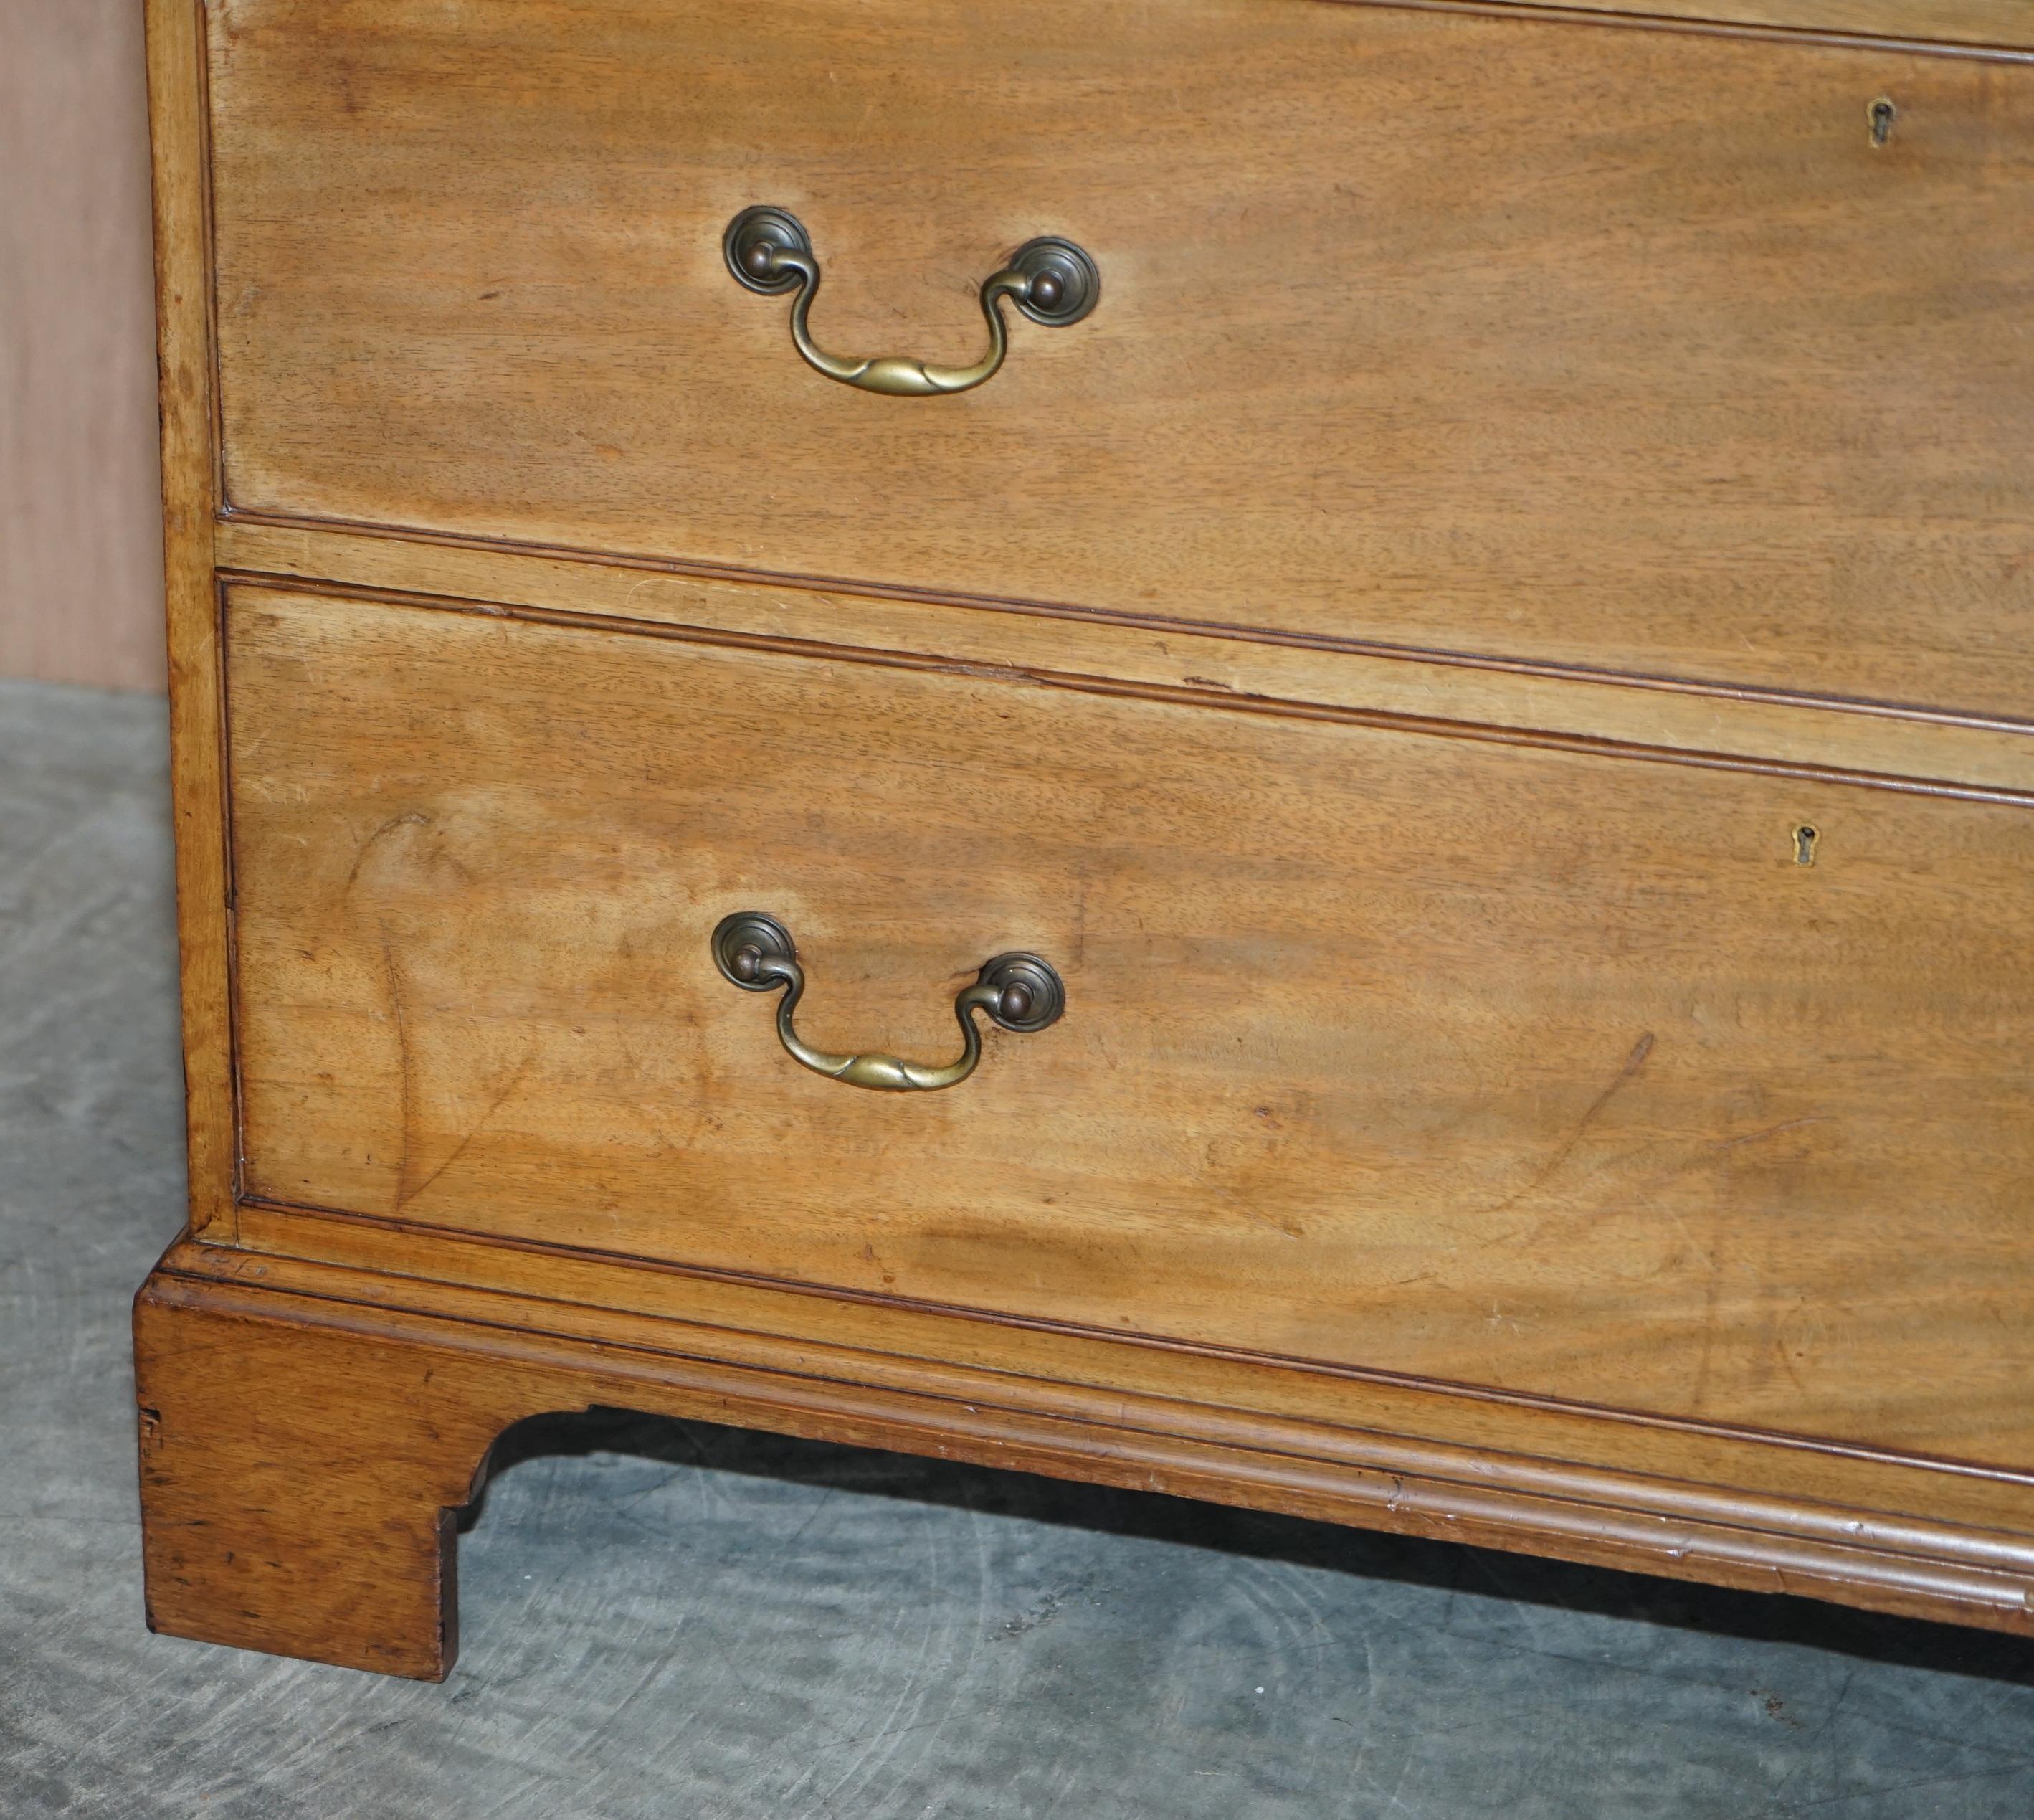 Late 19th Century Antique Howard & Son's Berners Street Hardwood Linen Press Chest of Drawers For Sale